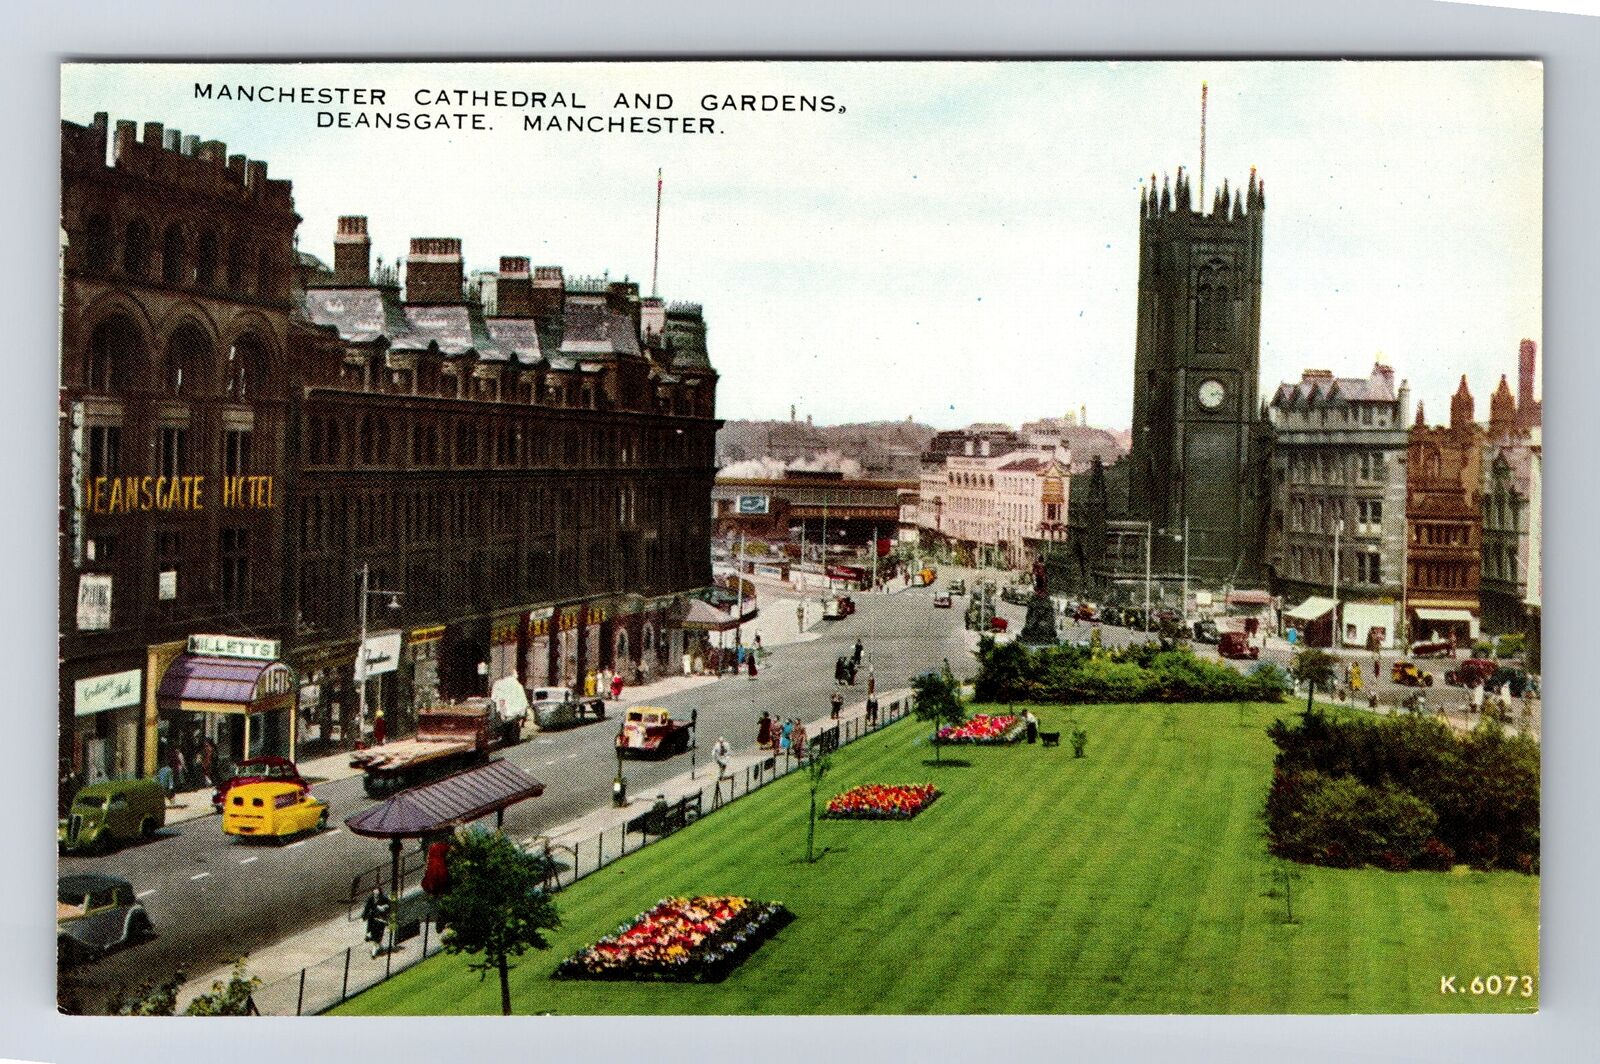 Manchester-England, Manchester Cathedral and Gardens, Vintage Postcard